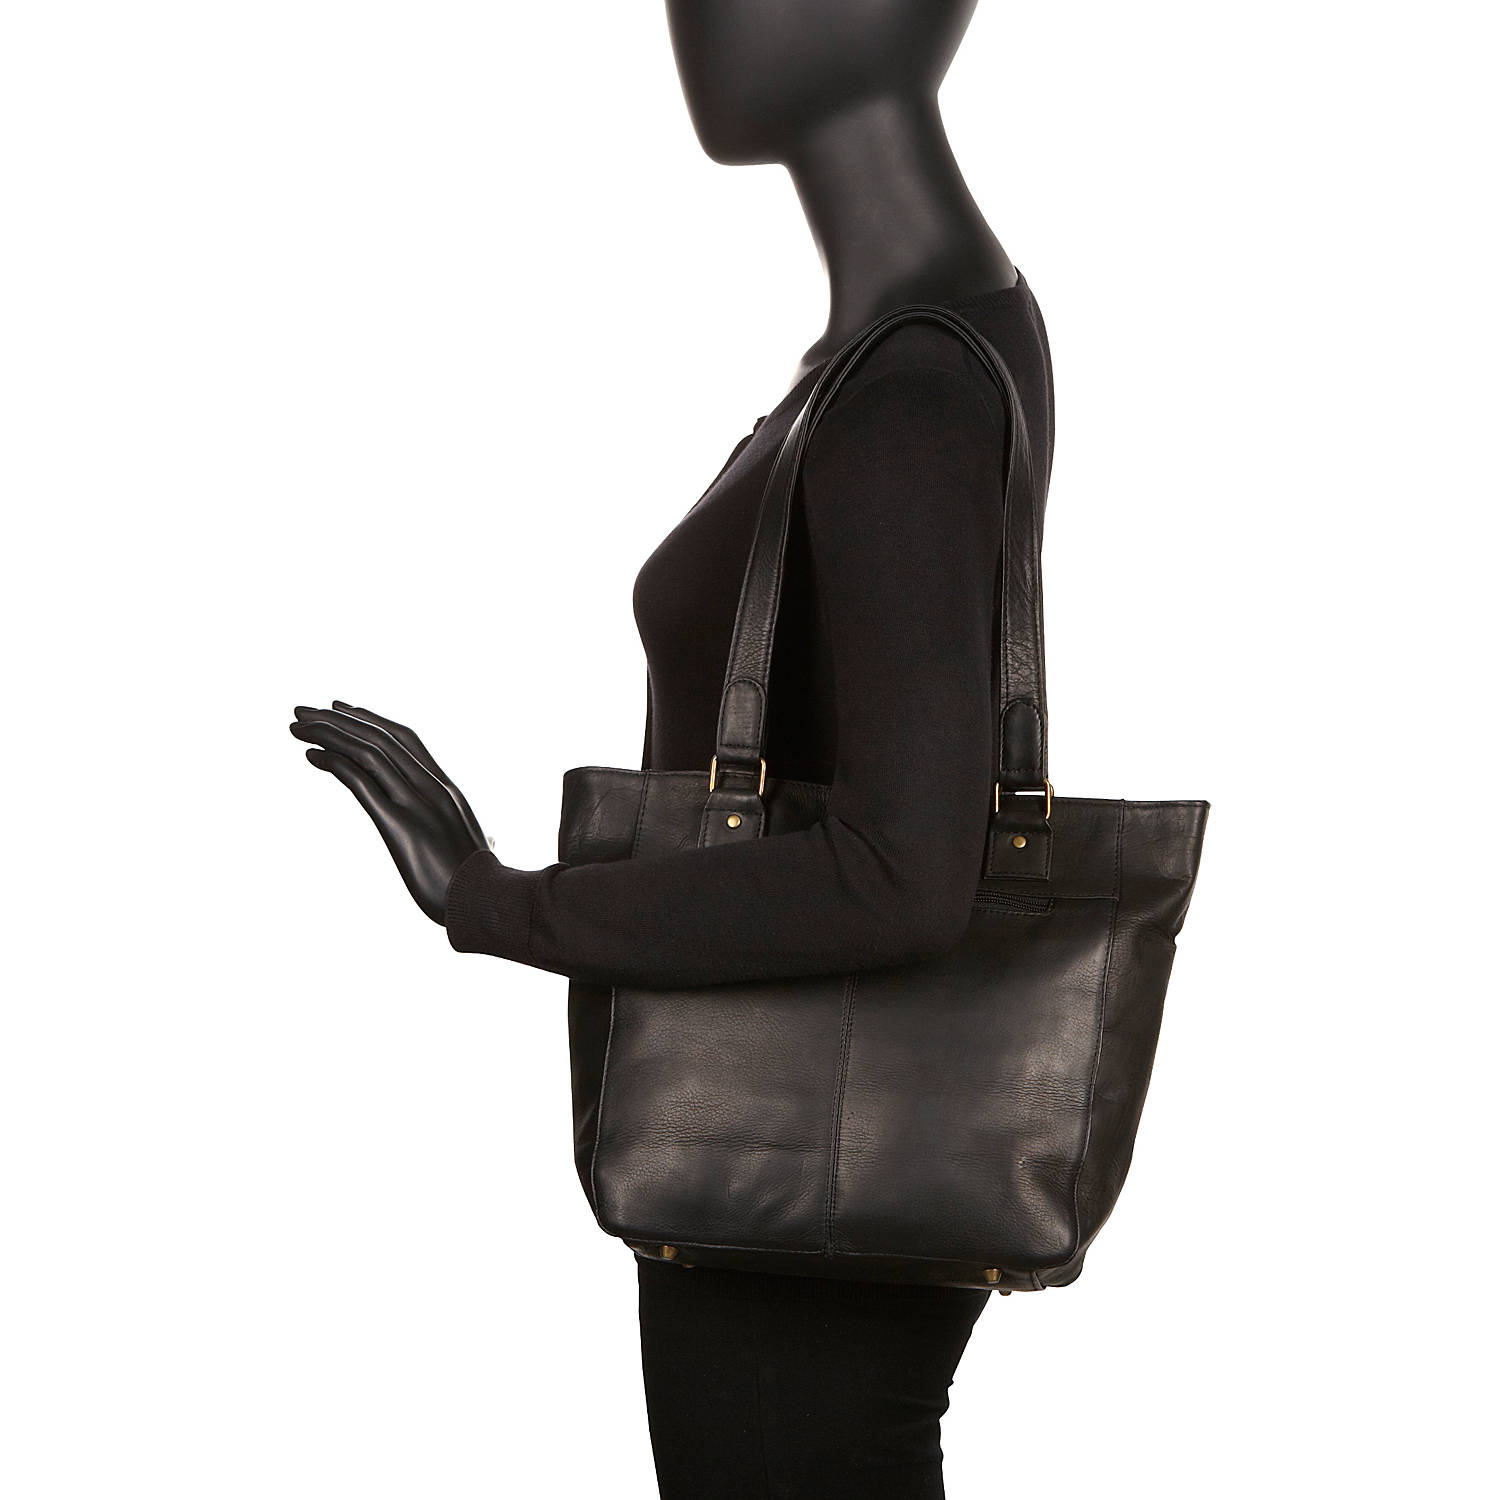 Le Donne Leather Garrowby Tote LD-9876 - image 2 of 6